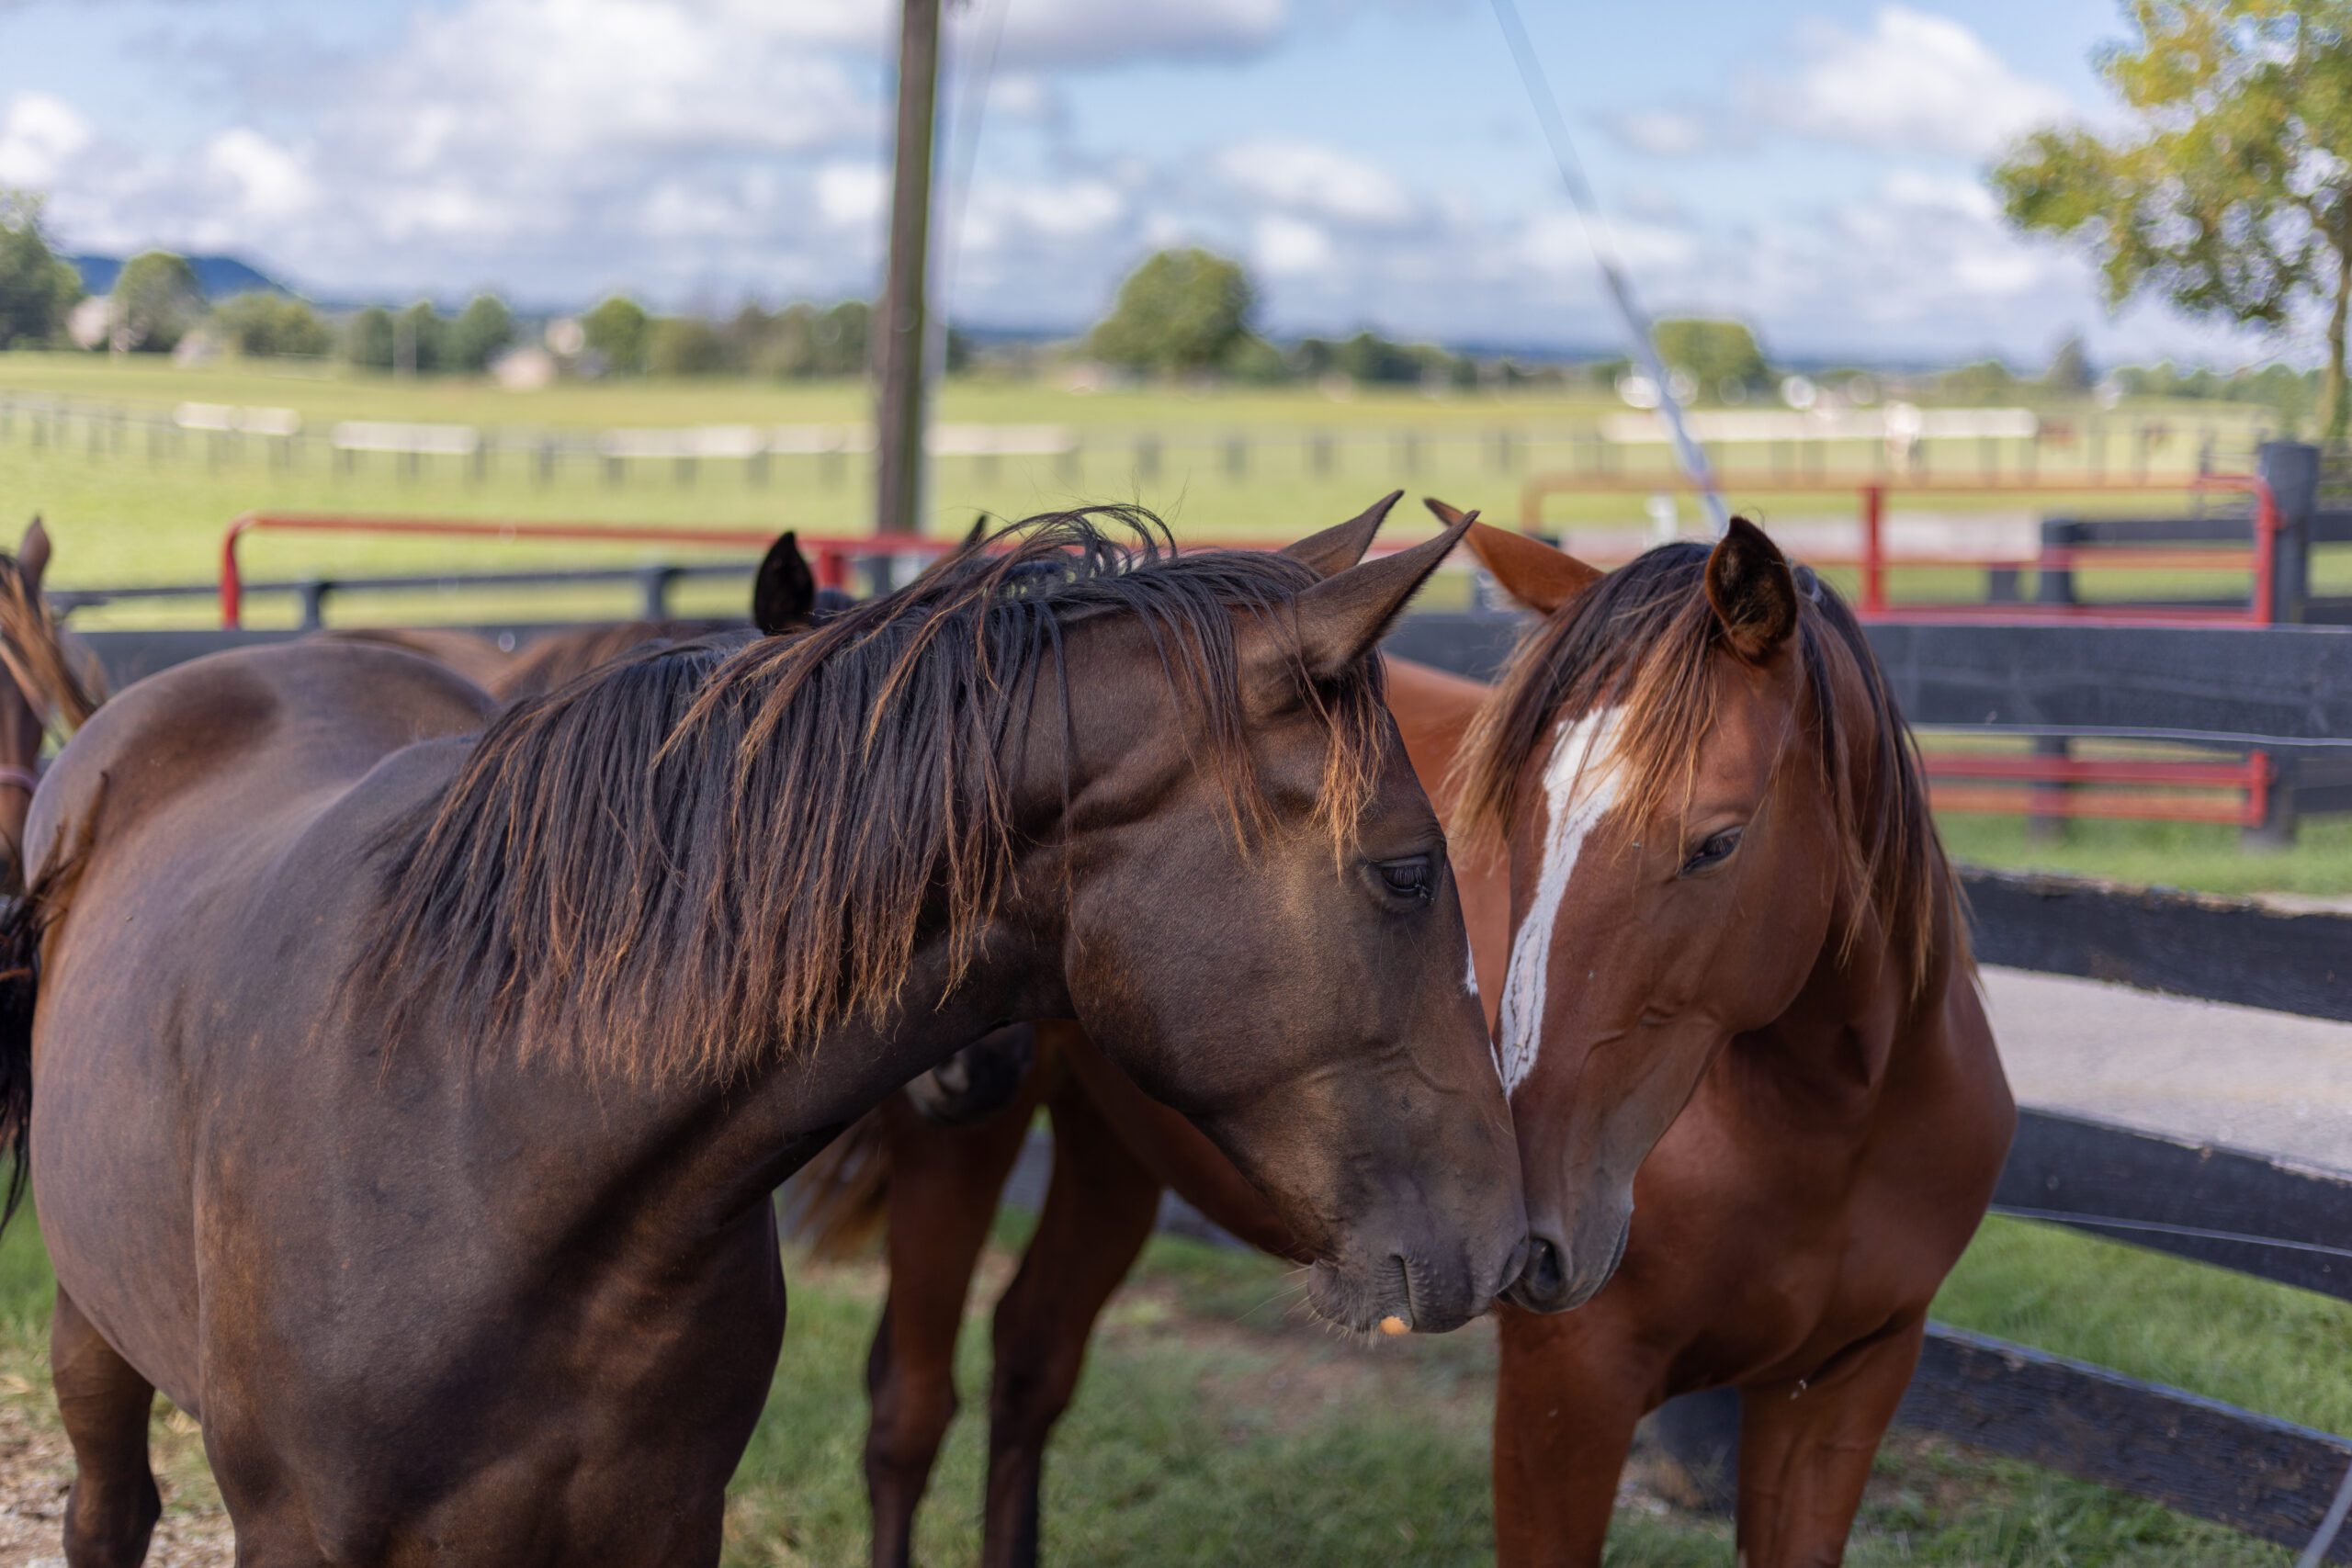 Two horses sniff noses